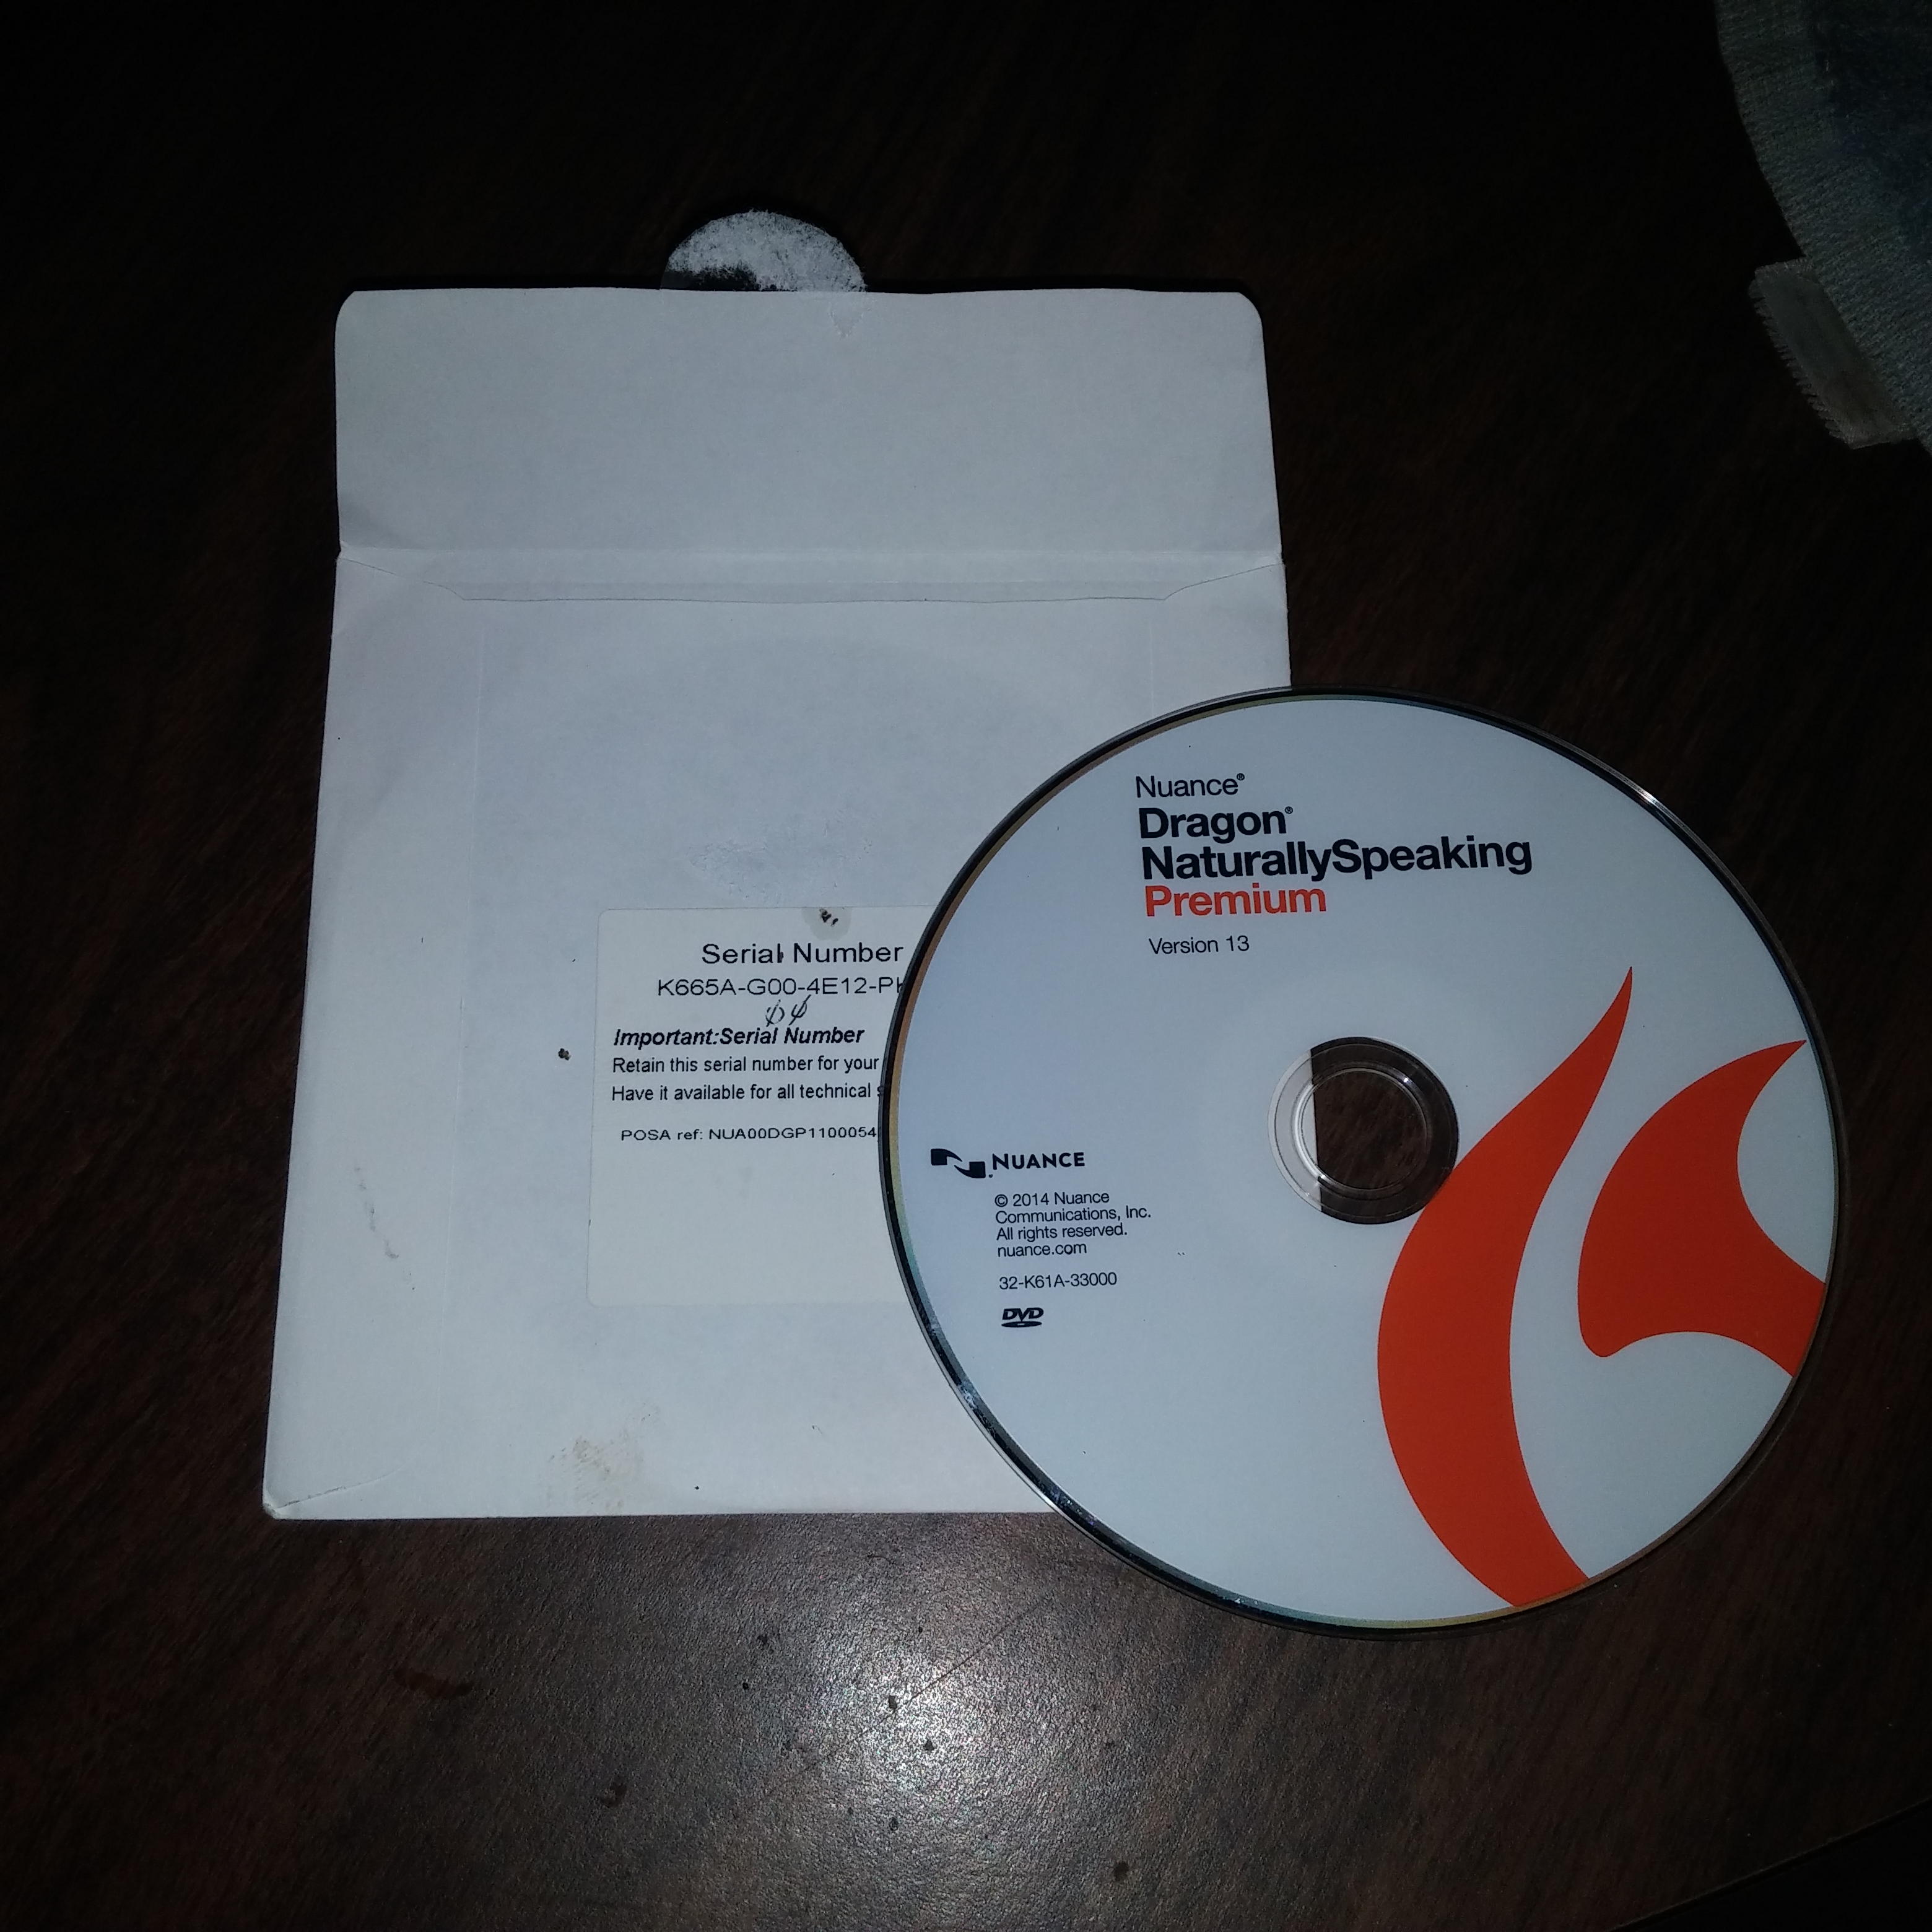 The actual disk  and serial number purchased from Amazon